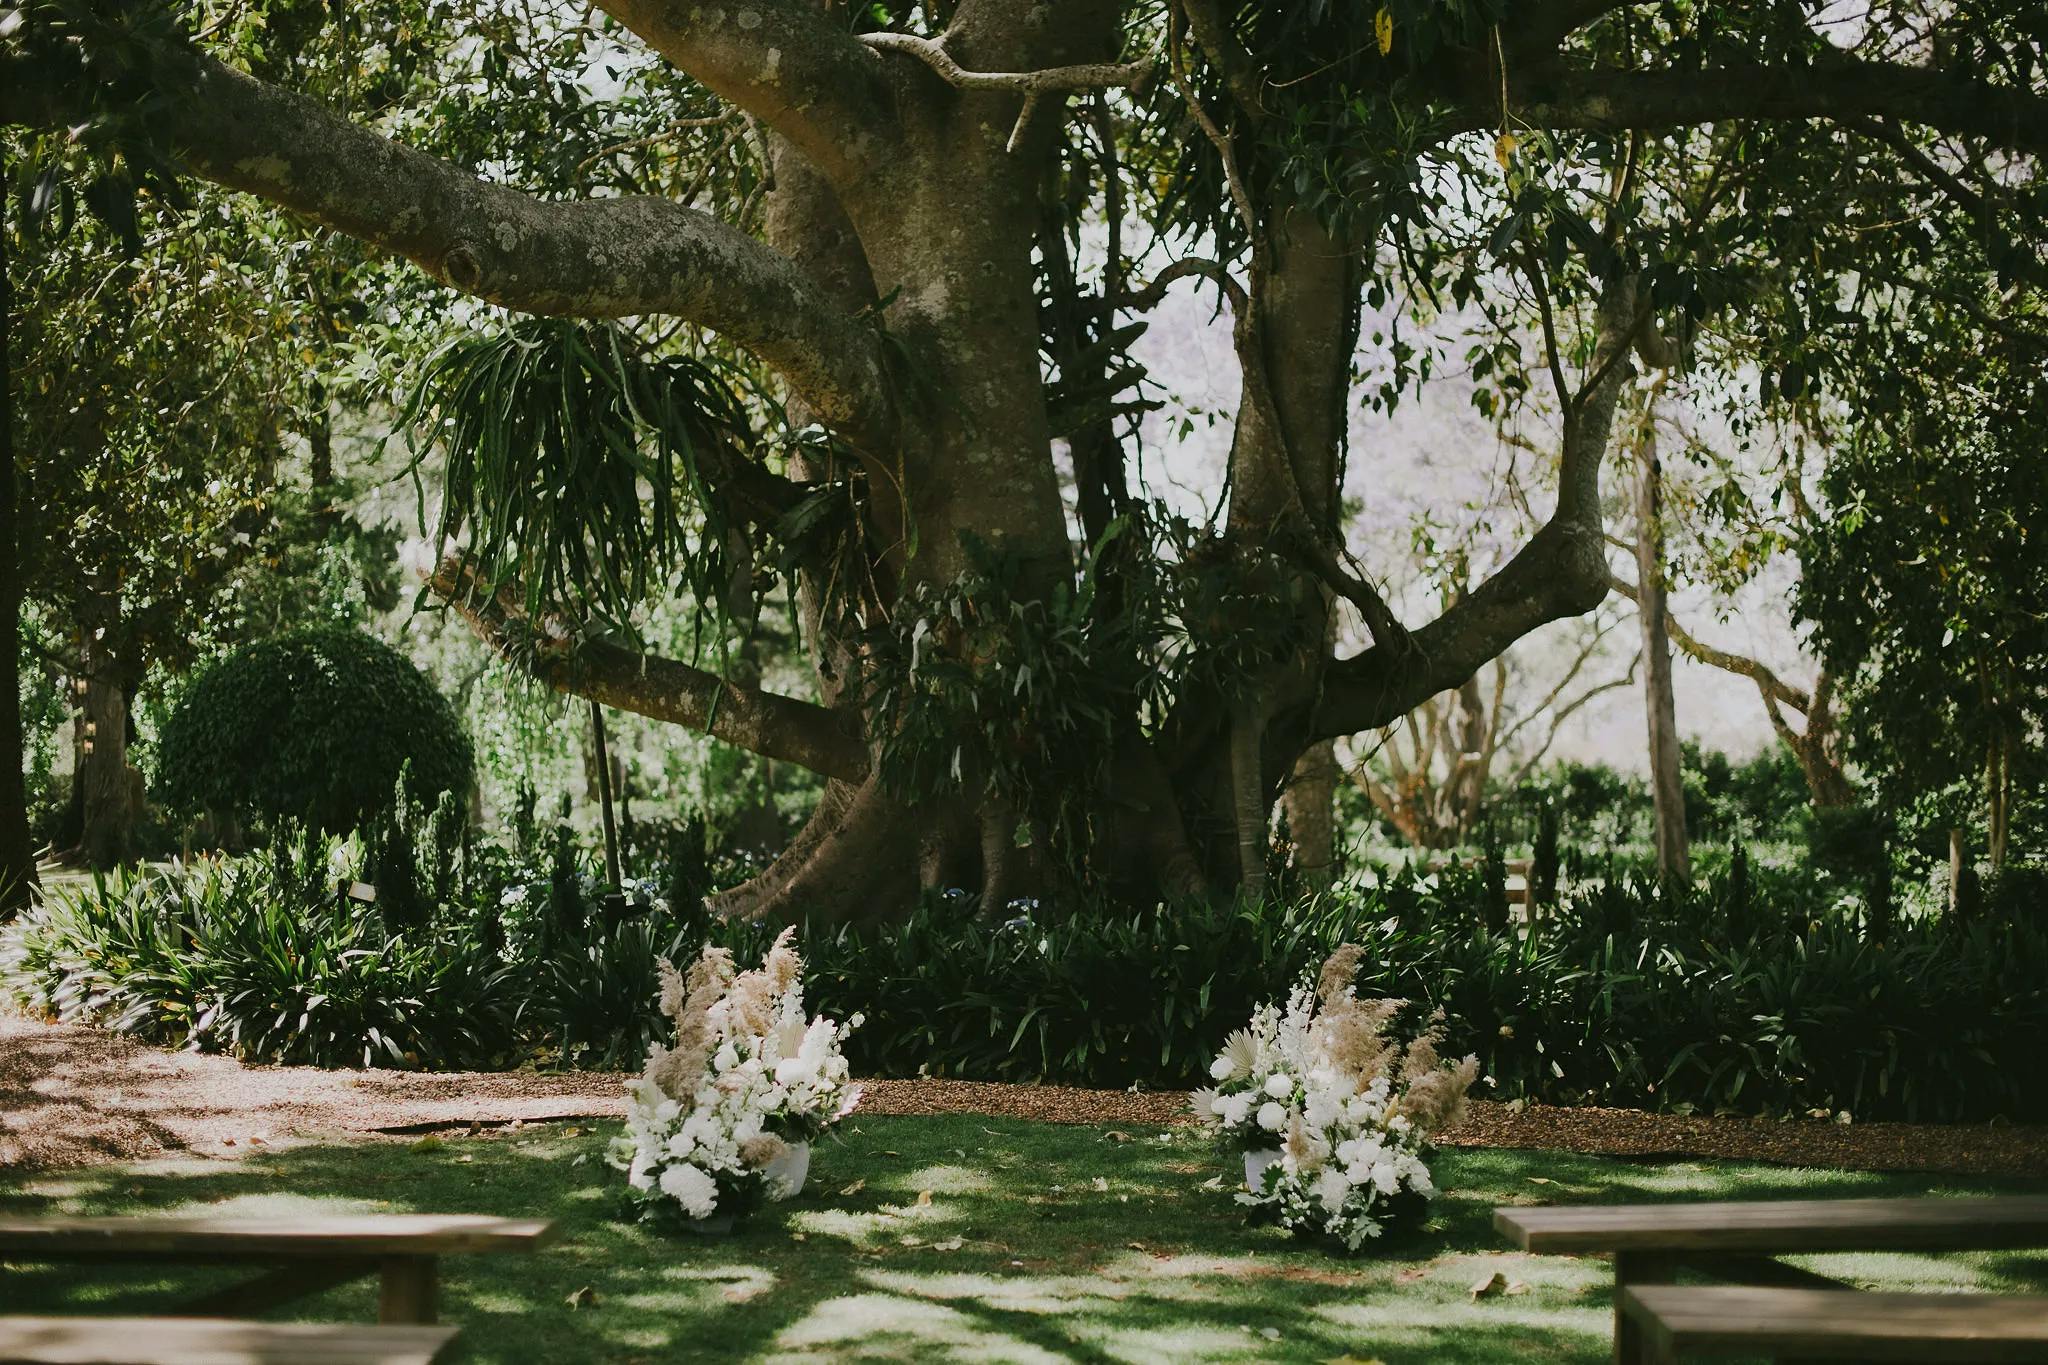 A beautiful outdoor setup for an event, with two floral arrangements featuring white and pink flowers placed under a large, sprawling tree. Wooden benches line the sides, and lush green foliage surrounds the area, creating a serene atmosphere.